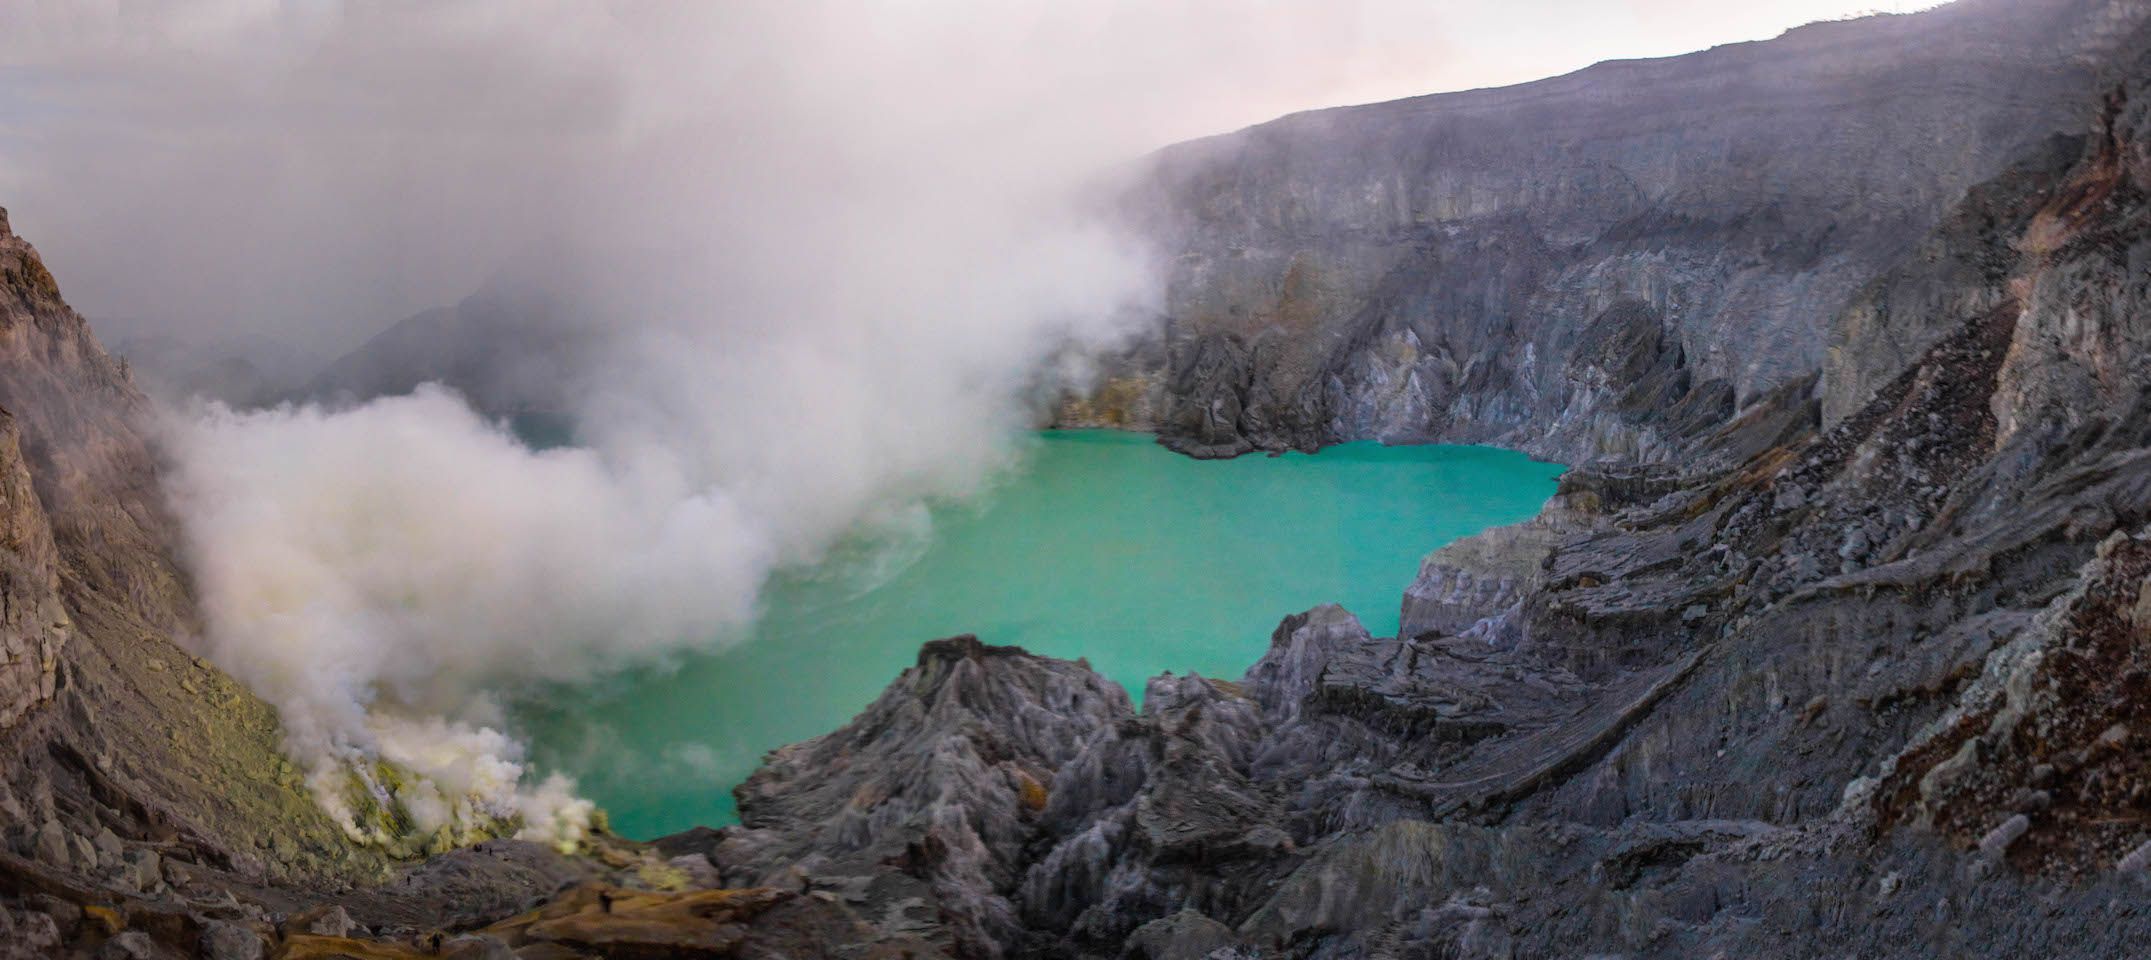 Panoramic view of the lake of Mt. Ijen, Indonesia